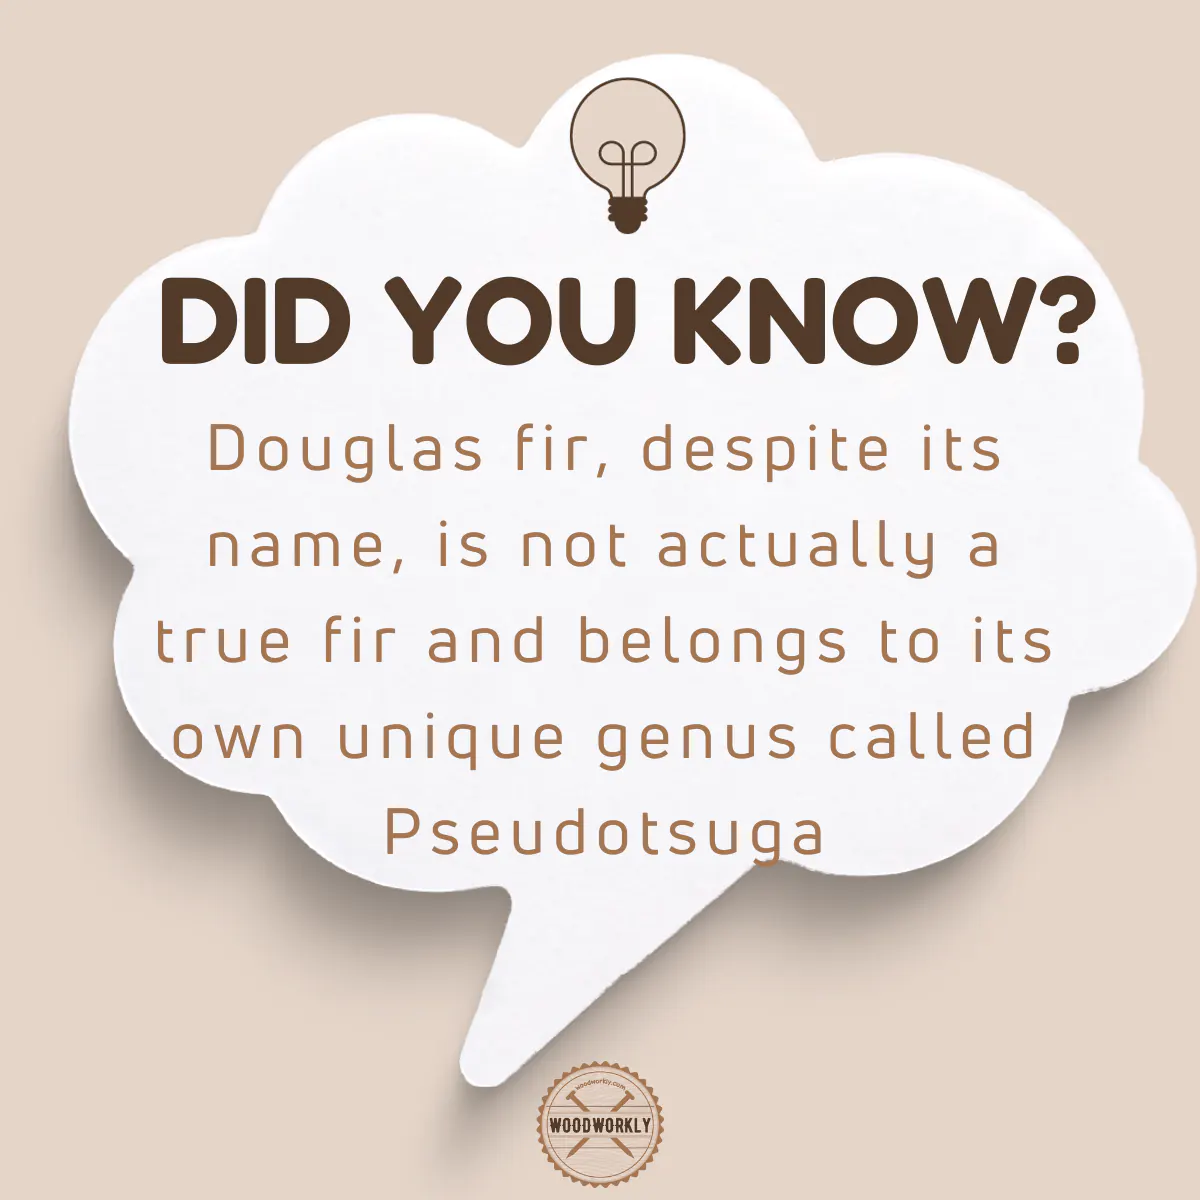 Did you know fact about Douglas fir